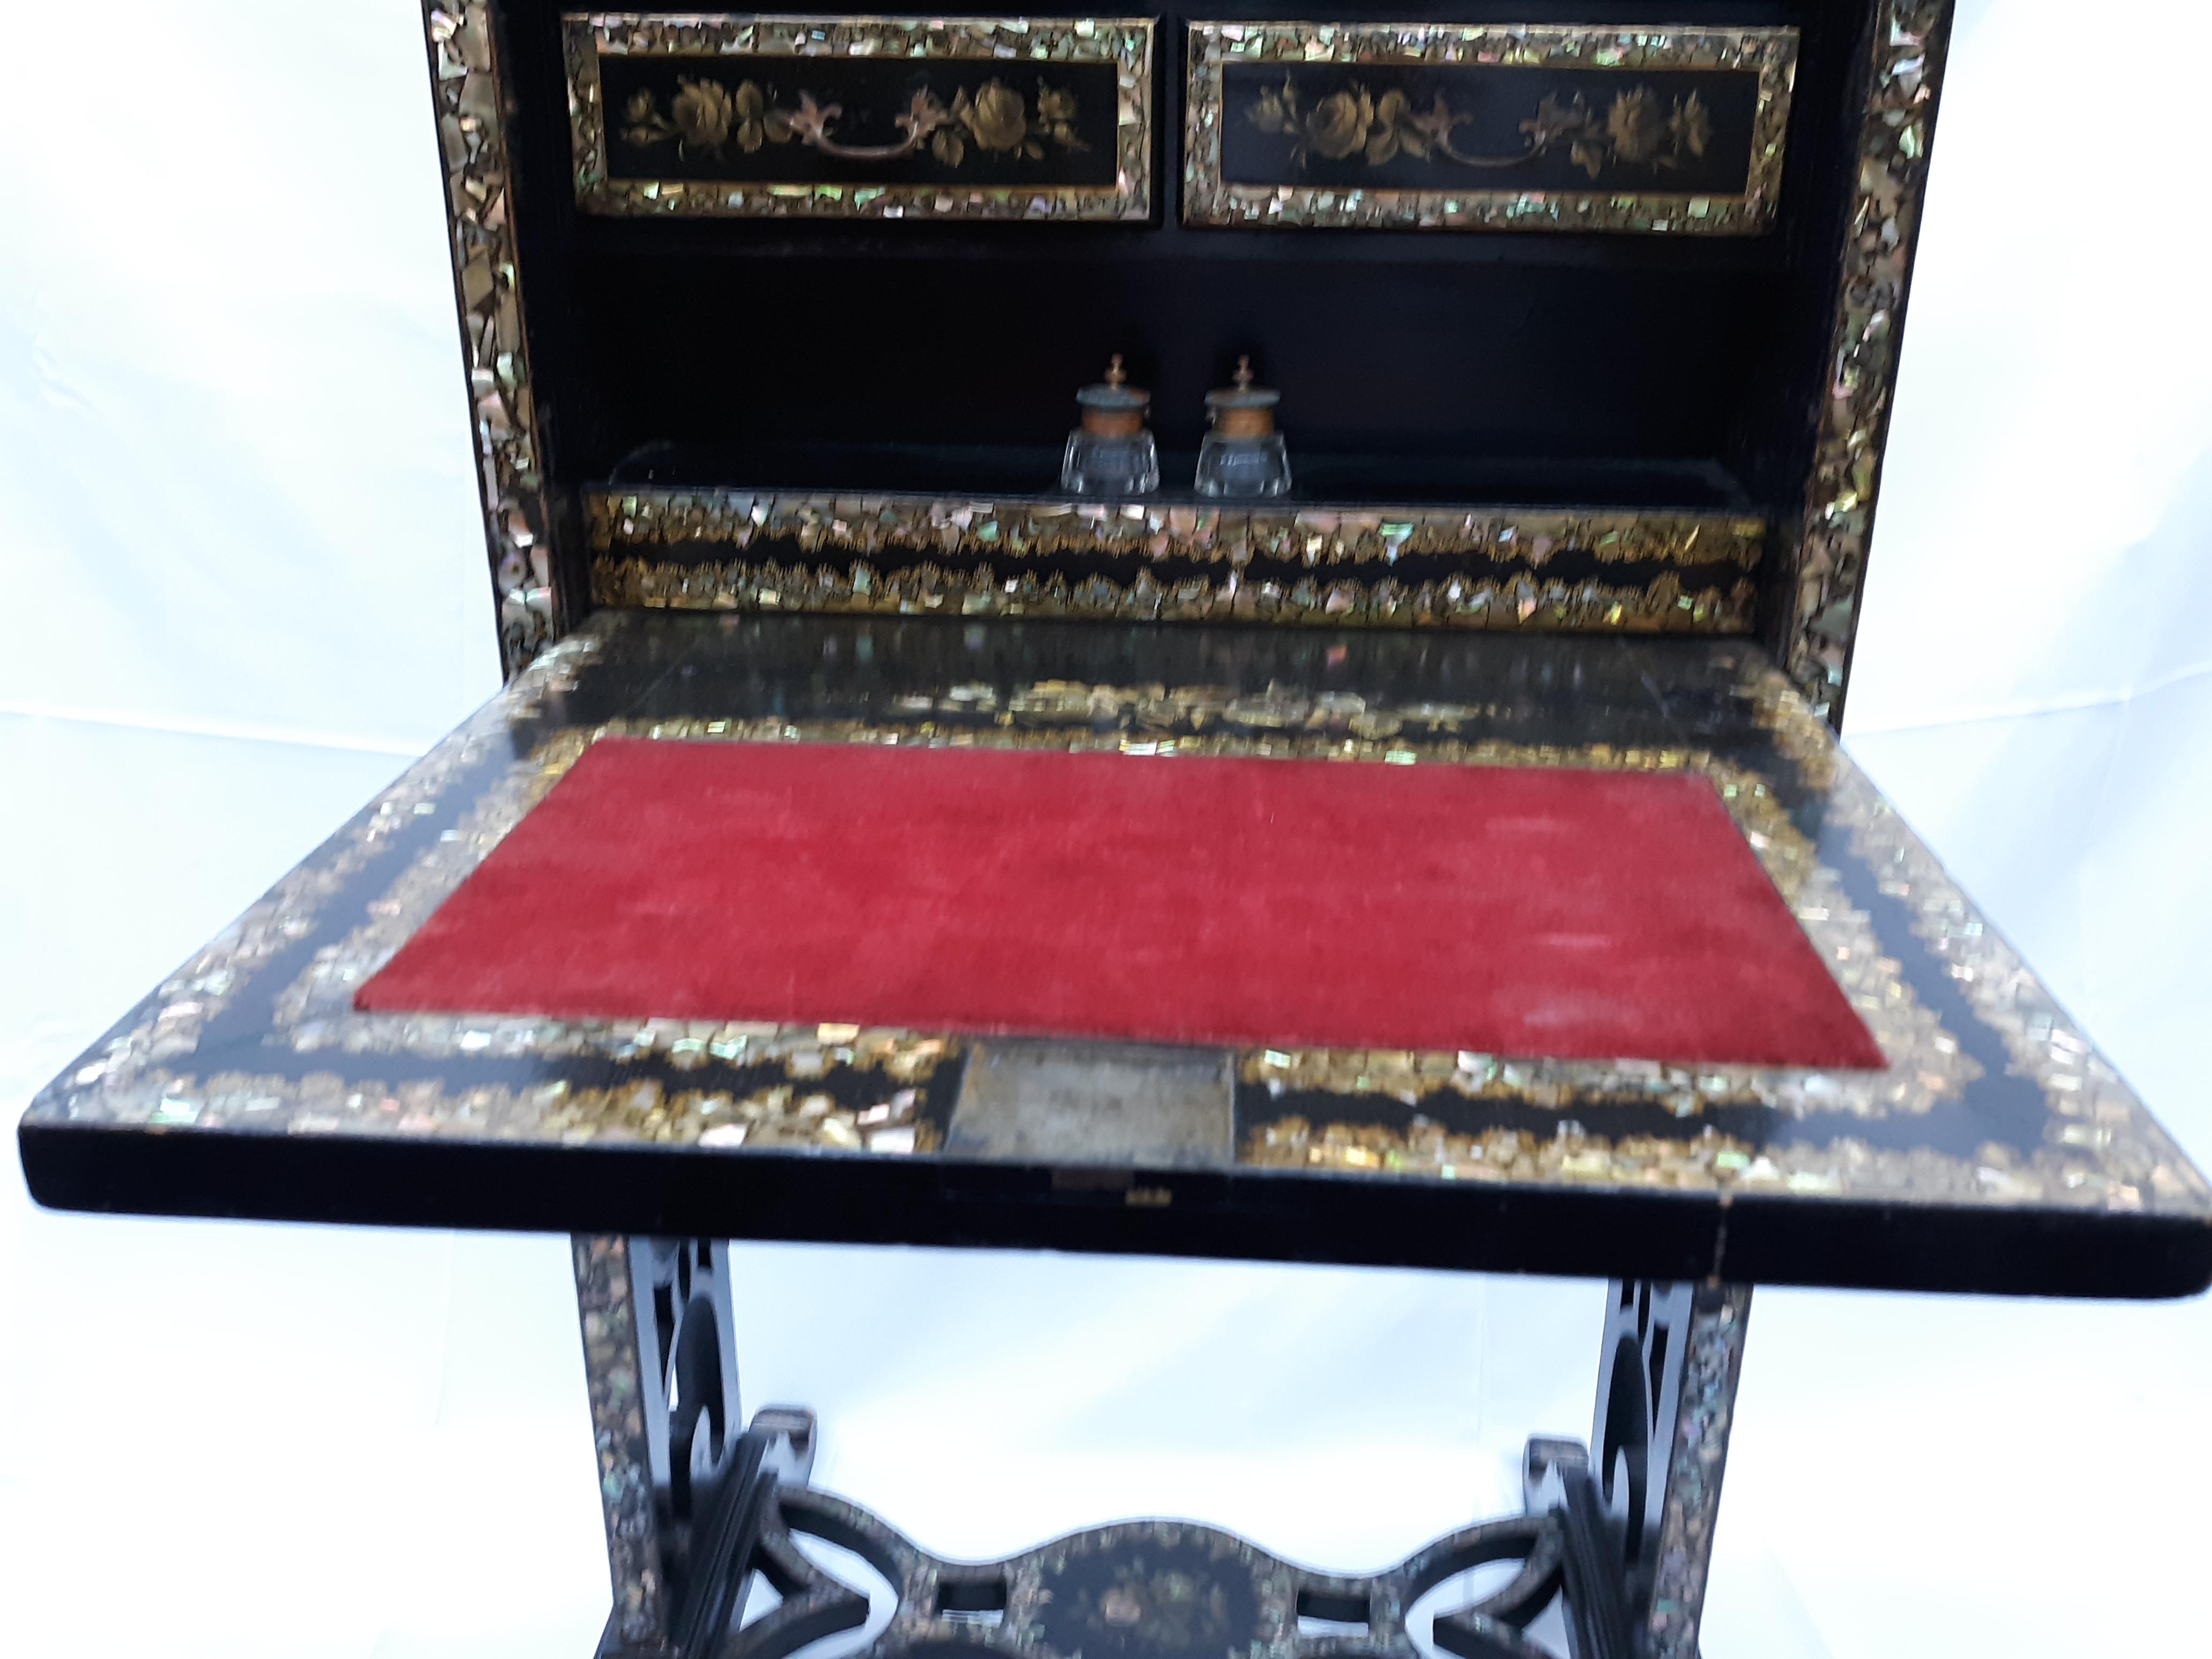 Early 1800 Ladies Perfume, Makeup and Jewelry Table with Inlaid Mother of Pearl For Sale 4